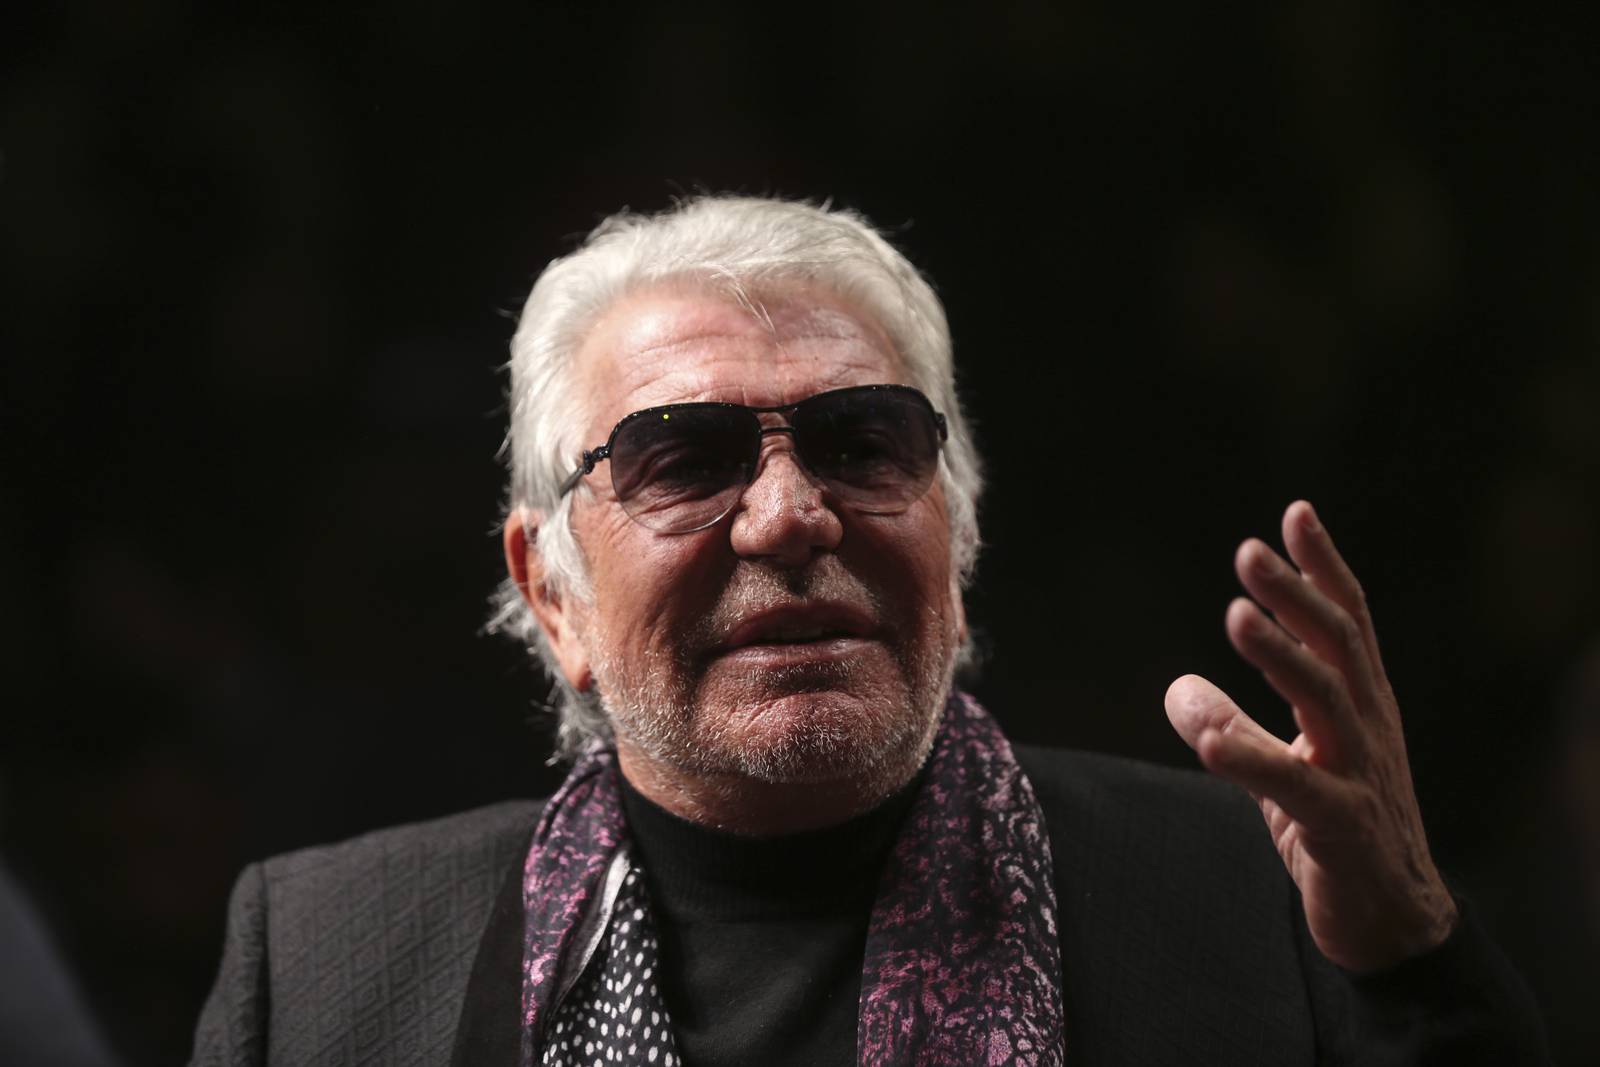 Roberto Cavalli obituary: Designer known for his hectic, blingy ...